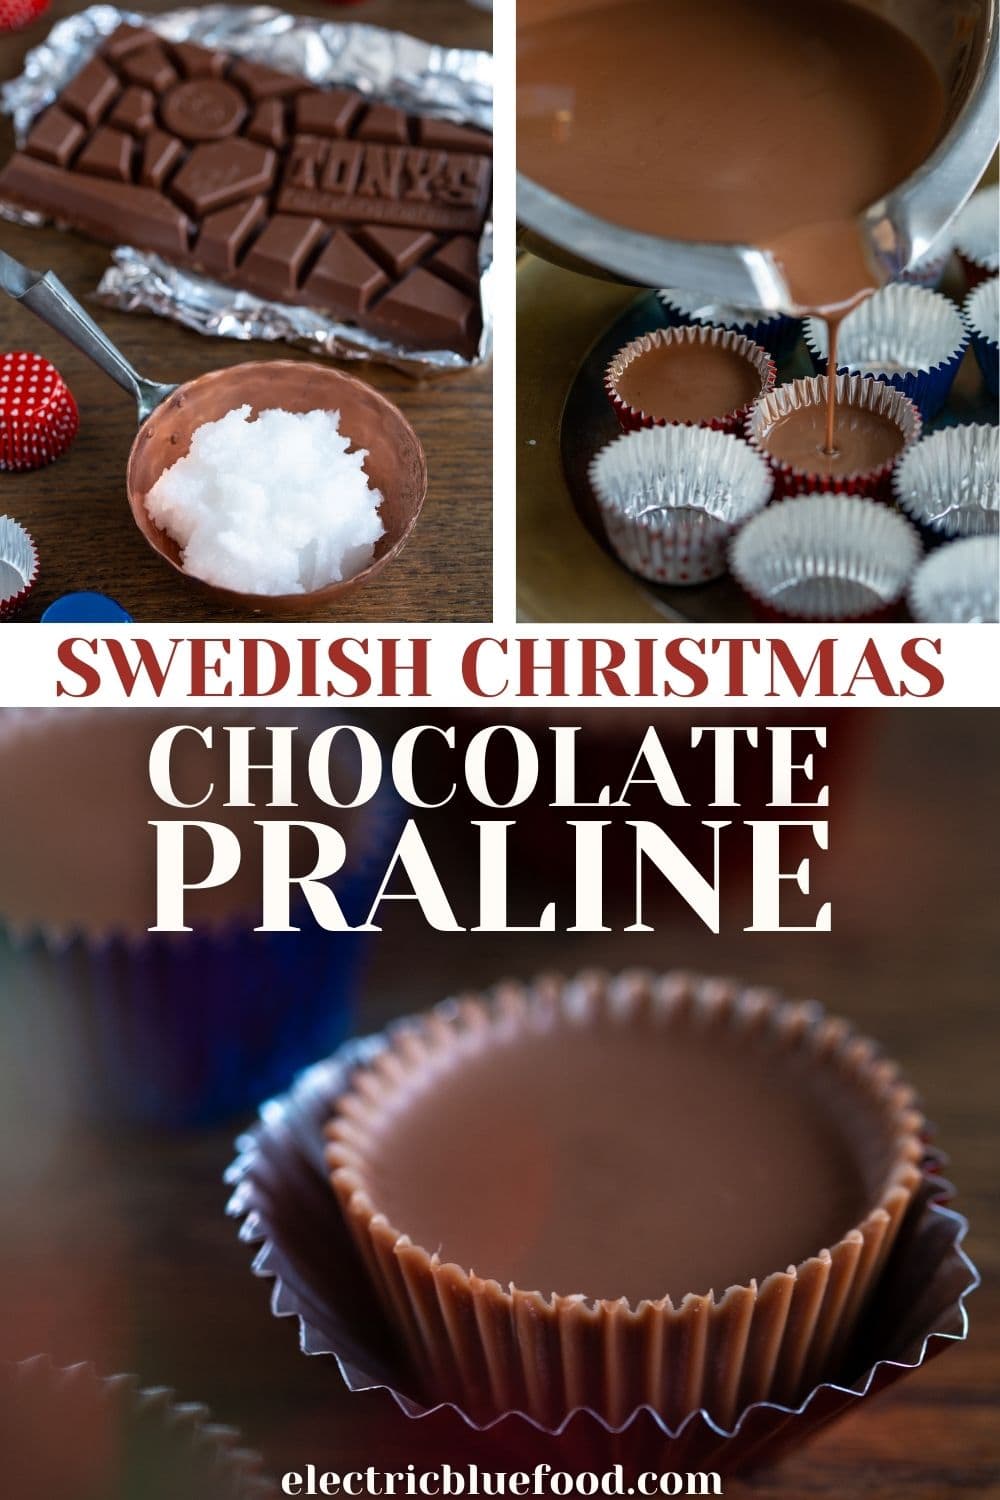 Ischoklad is the name of Swedish Christmas chocolate pralines made with chocolate and coconut oil. They give you a special 